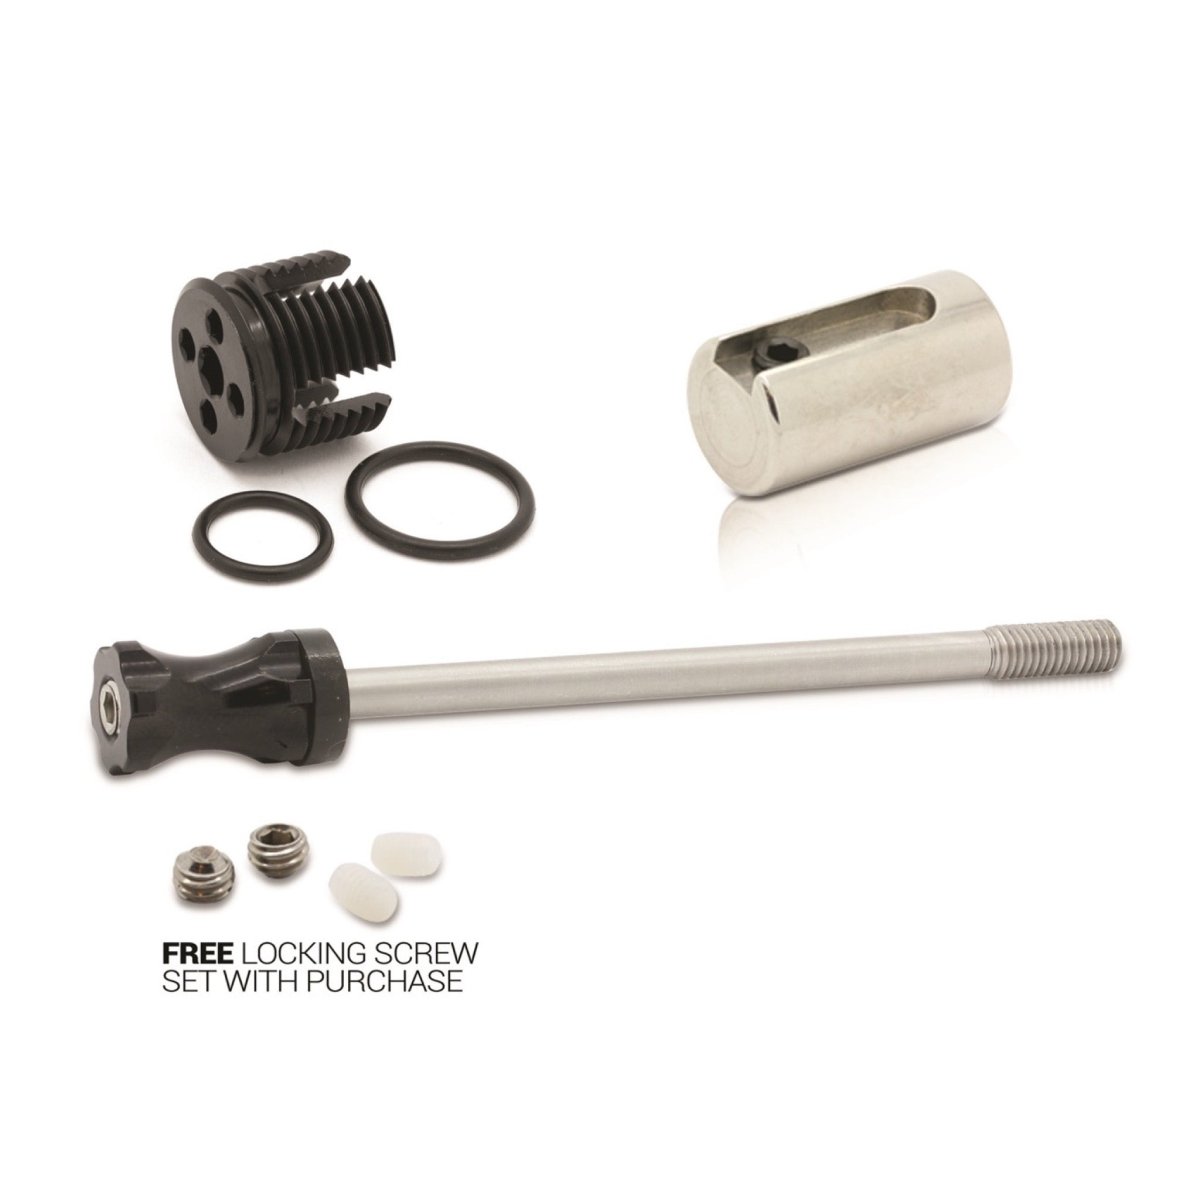 Inception Designs Heavy Hammer Upgrade Kit - Time 2 Paintball